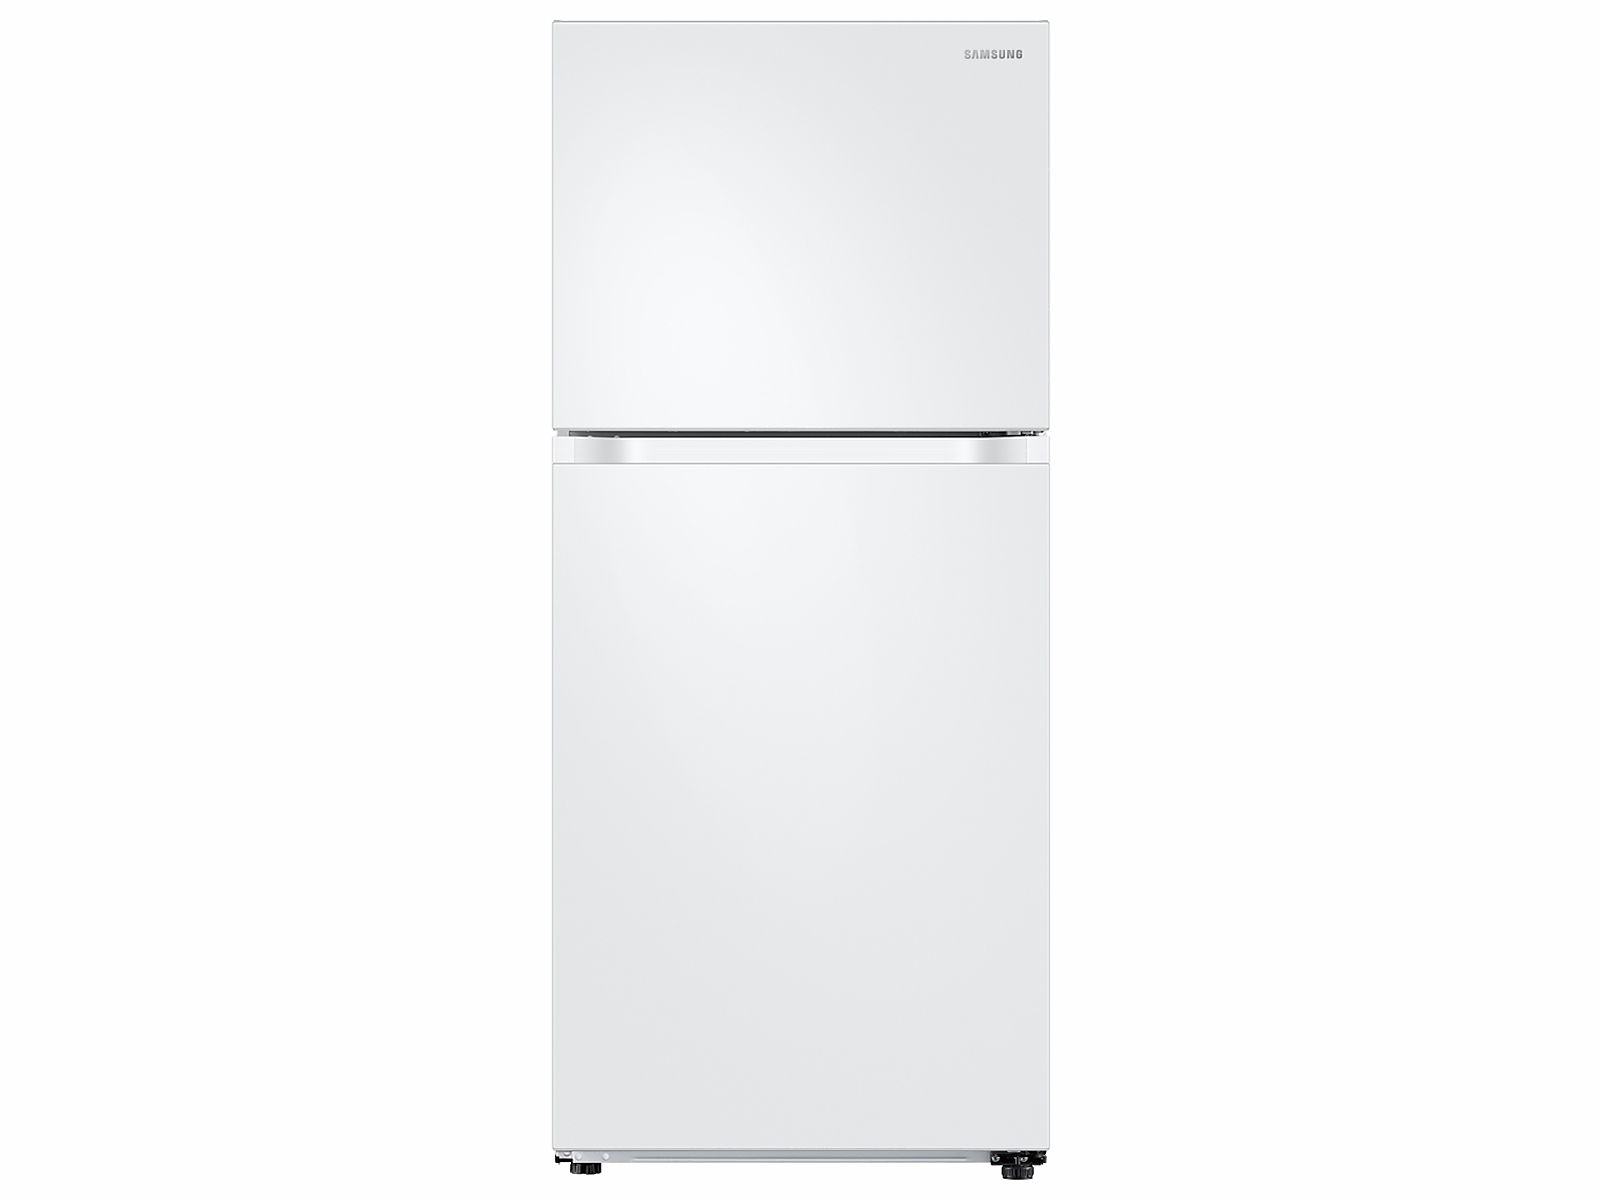 Samsung 18 cu. ft. Top Freezer Refrigerator with FlexZone™ and Ice Maker in White(RT18M6215WW/AA)